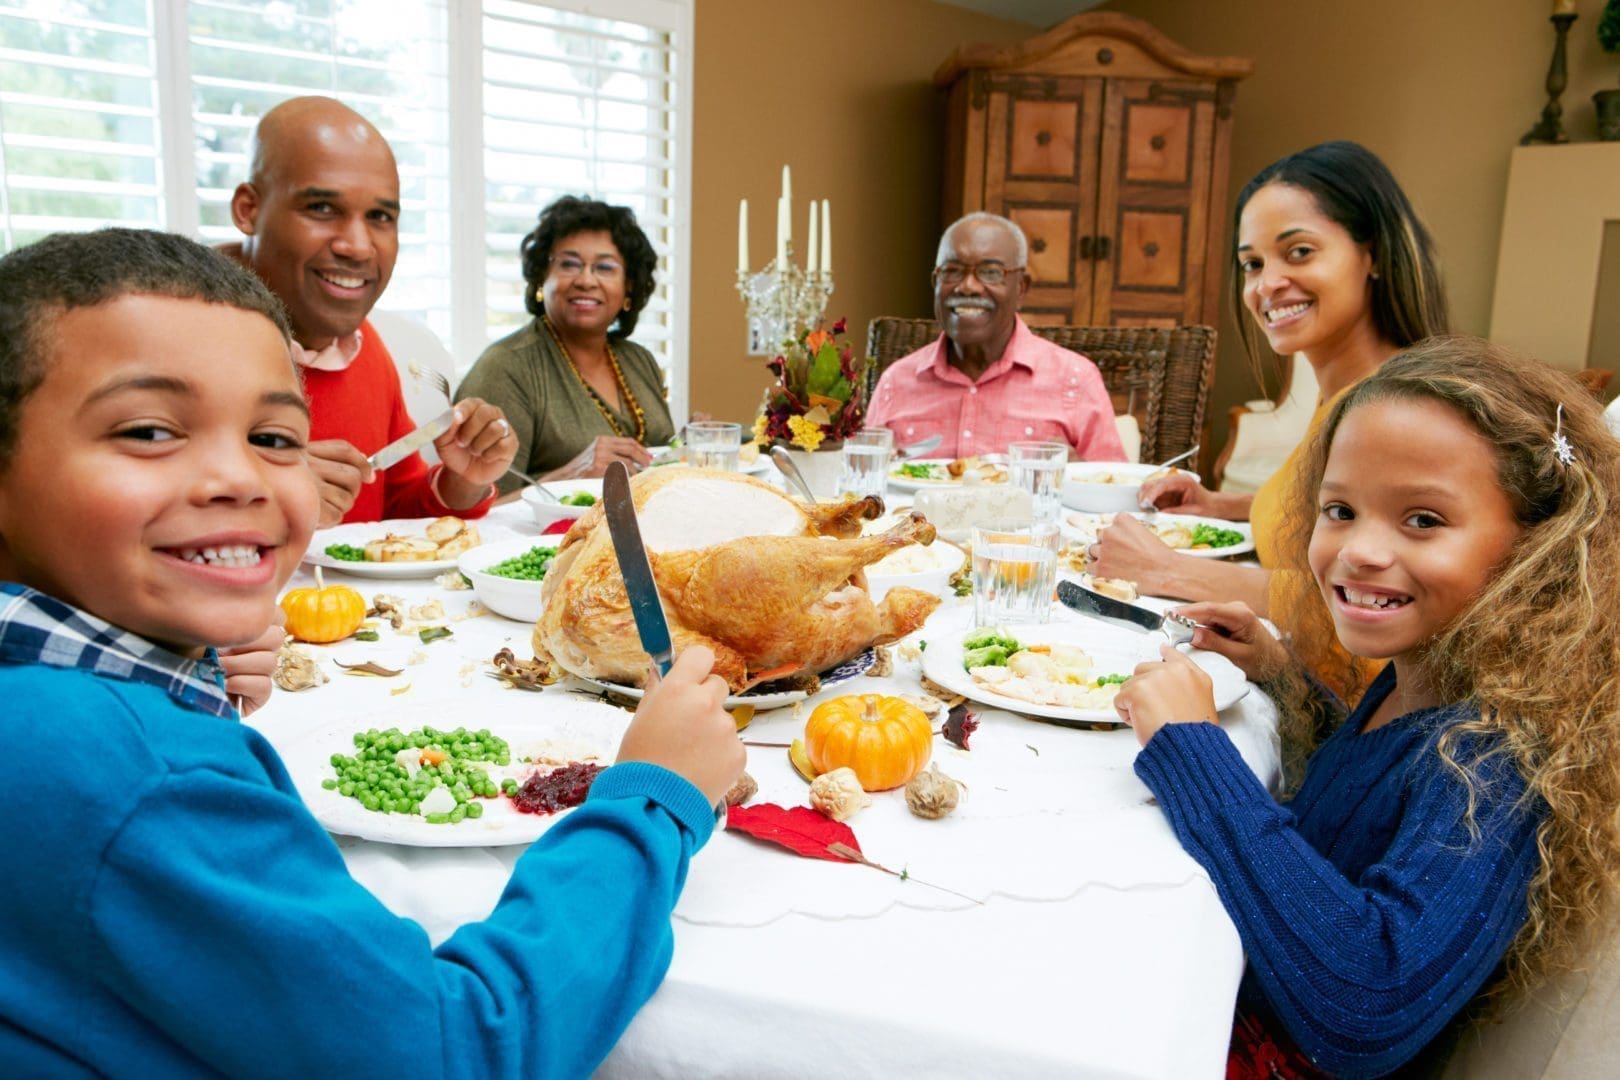 The Significance of Eating Together as a Family